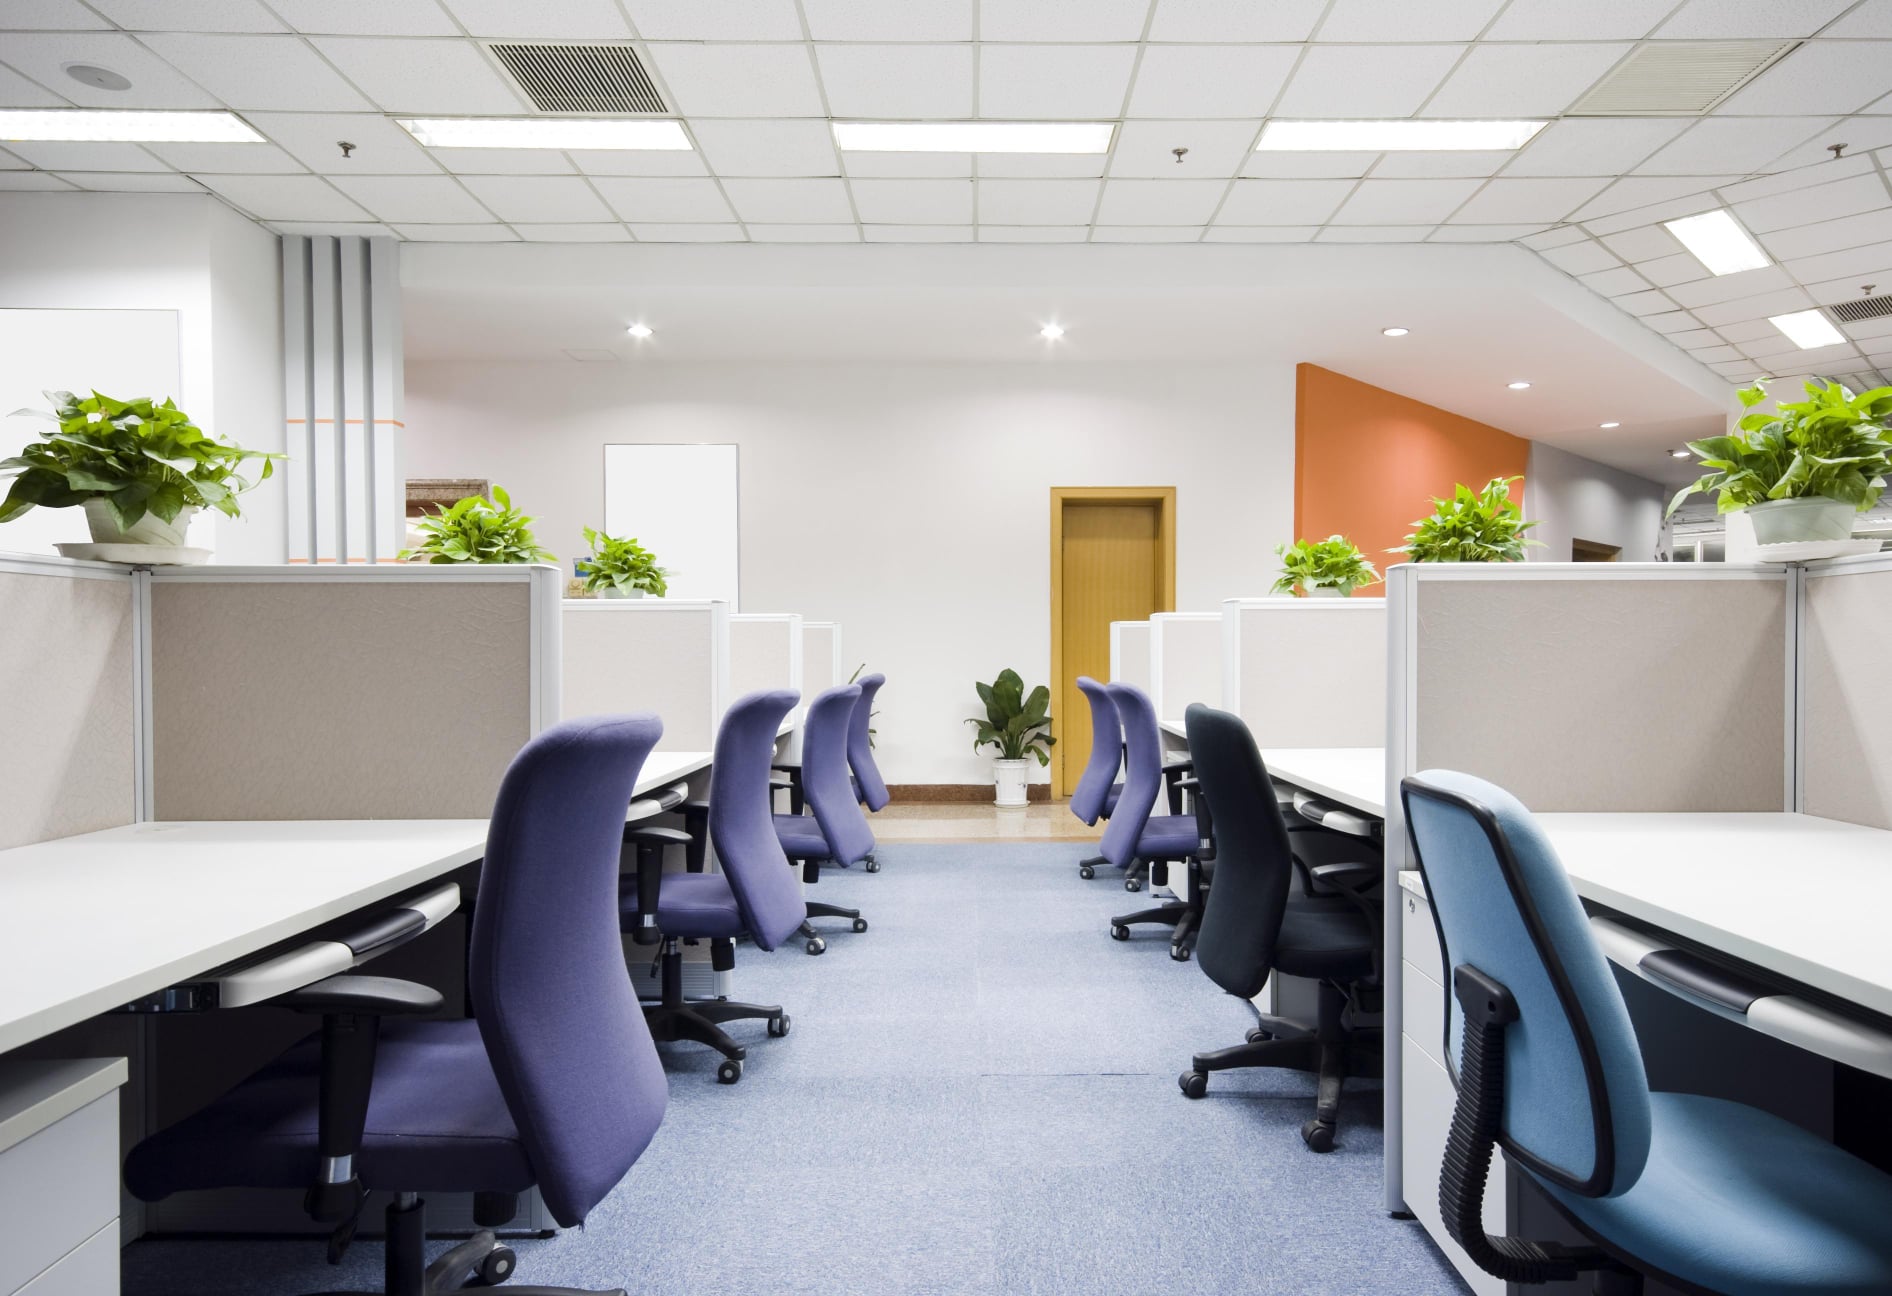 Top 7 Benefits of Modular Office Furniture Systems